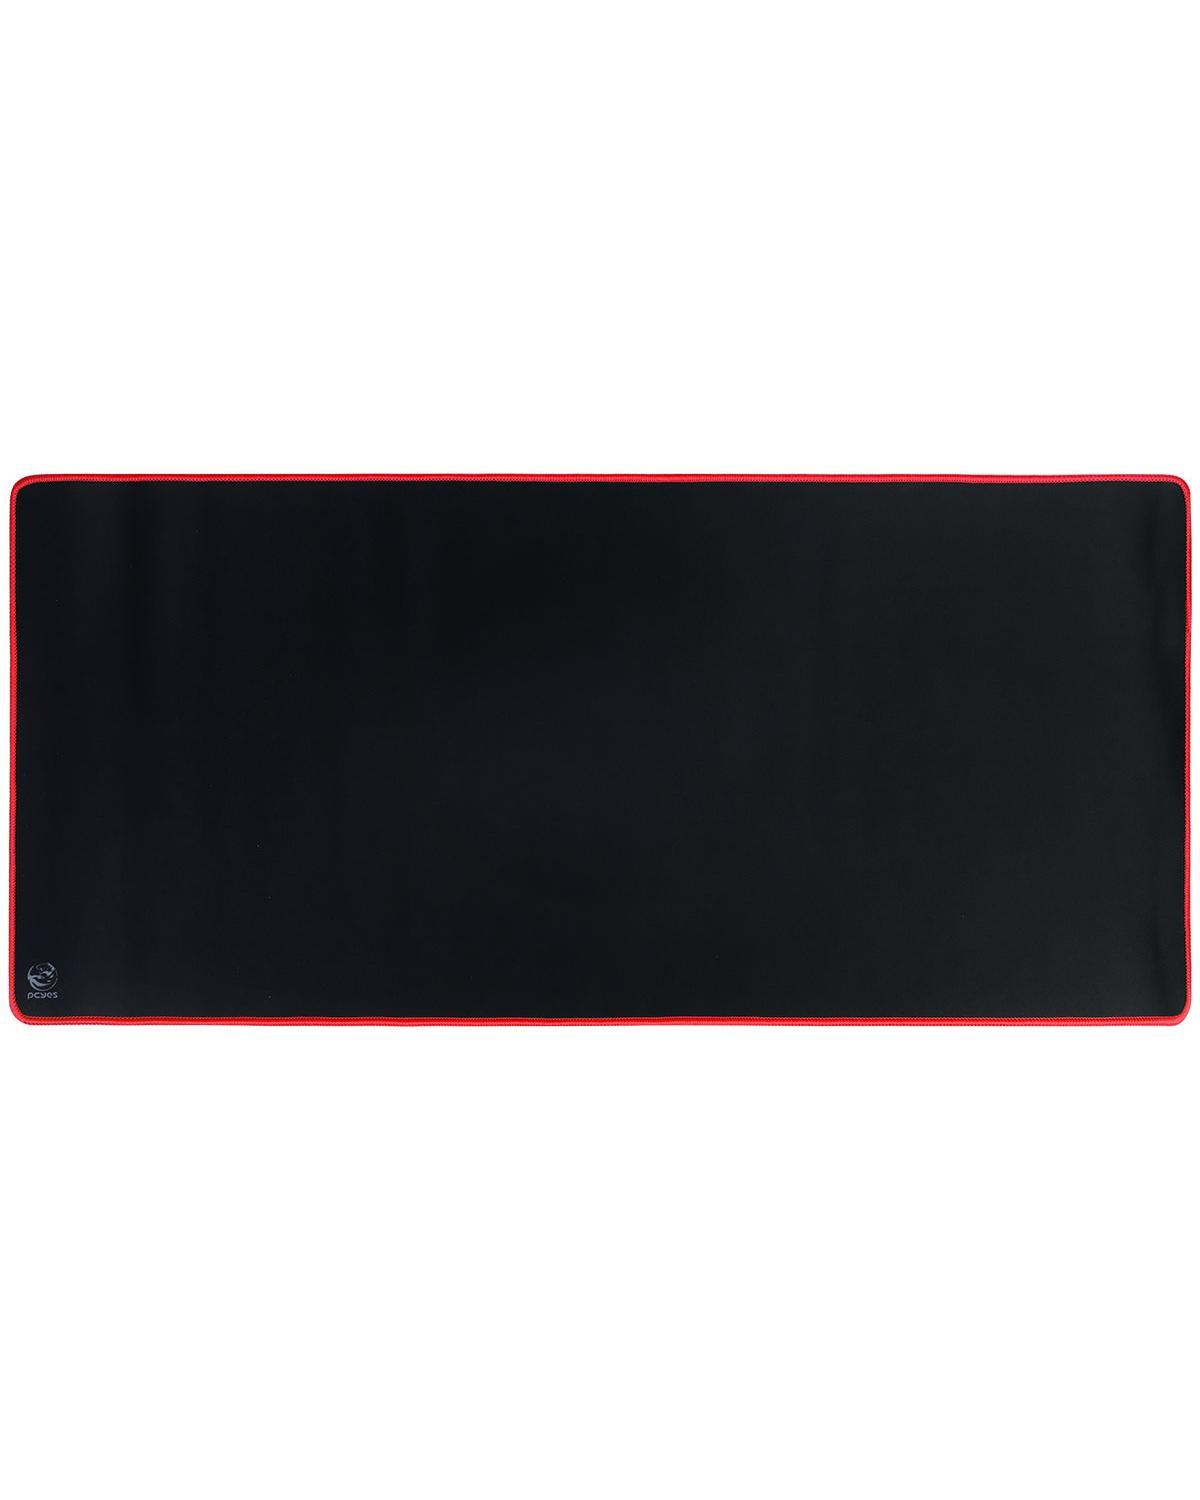 MOUSE PAD COLORS RED EXTENDED - ESTILO SPEED VERMELHO - 900X420MM - PMC90X42R